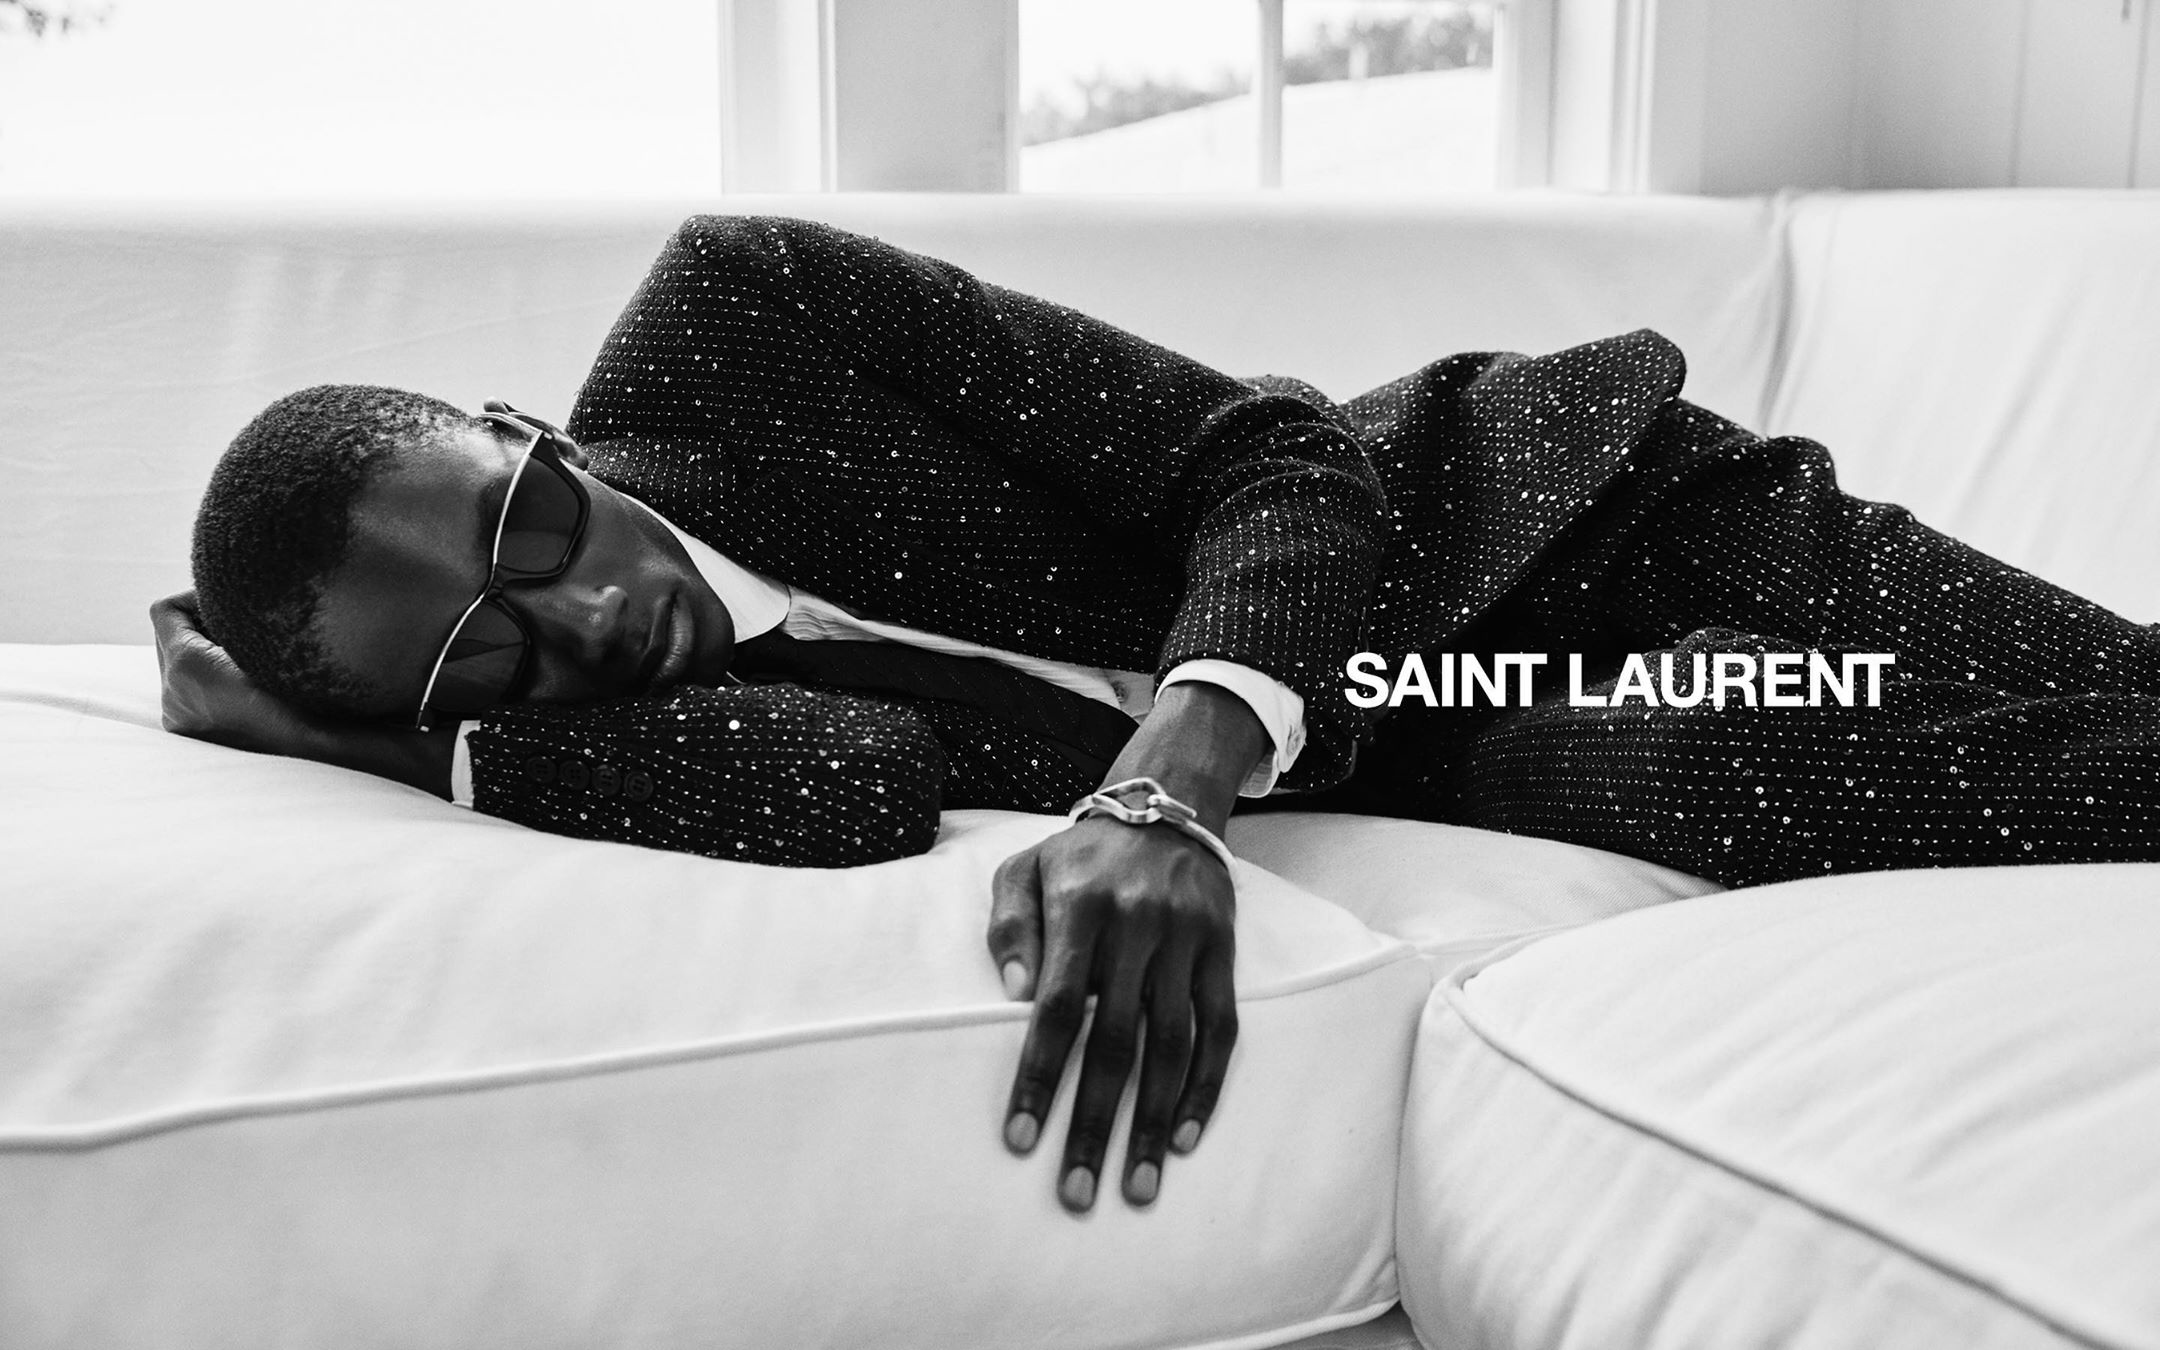 Saint Laurent Spring 2020 Campaign by Gray Sorrenti